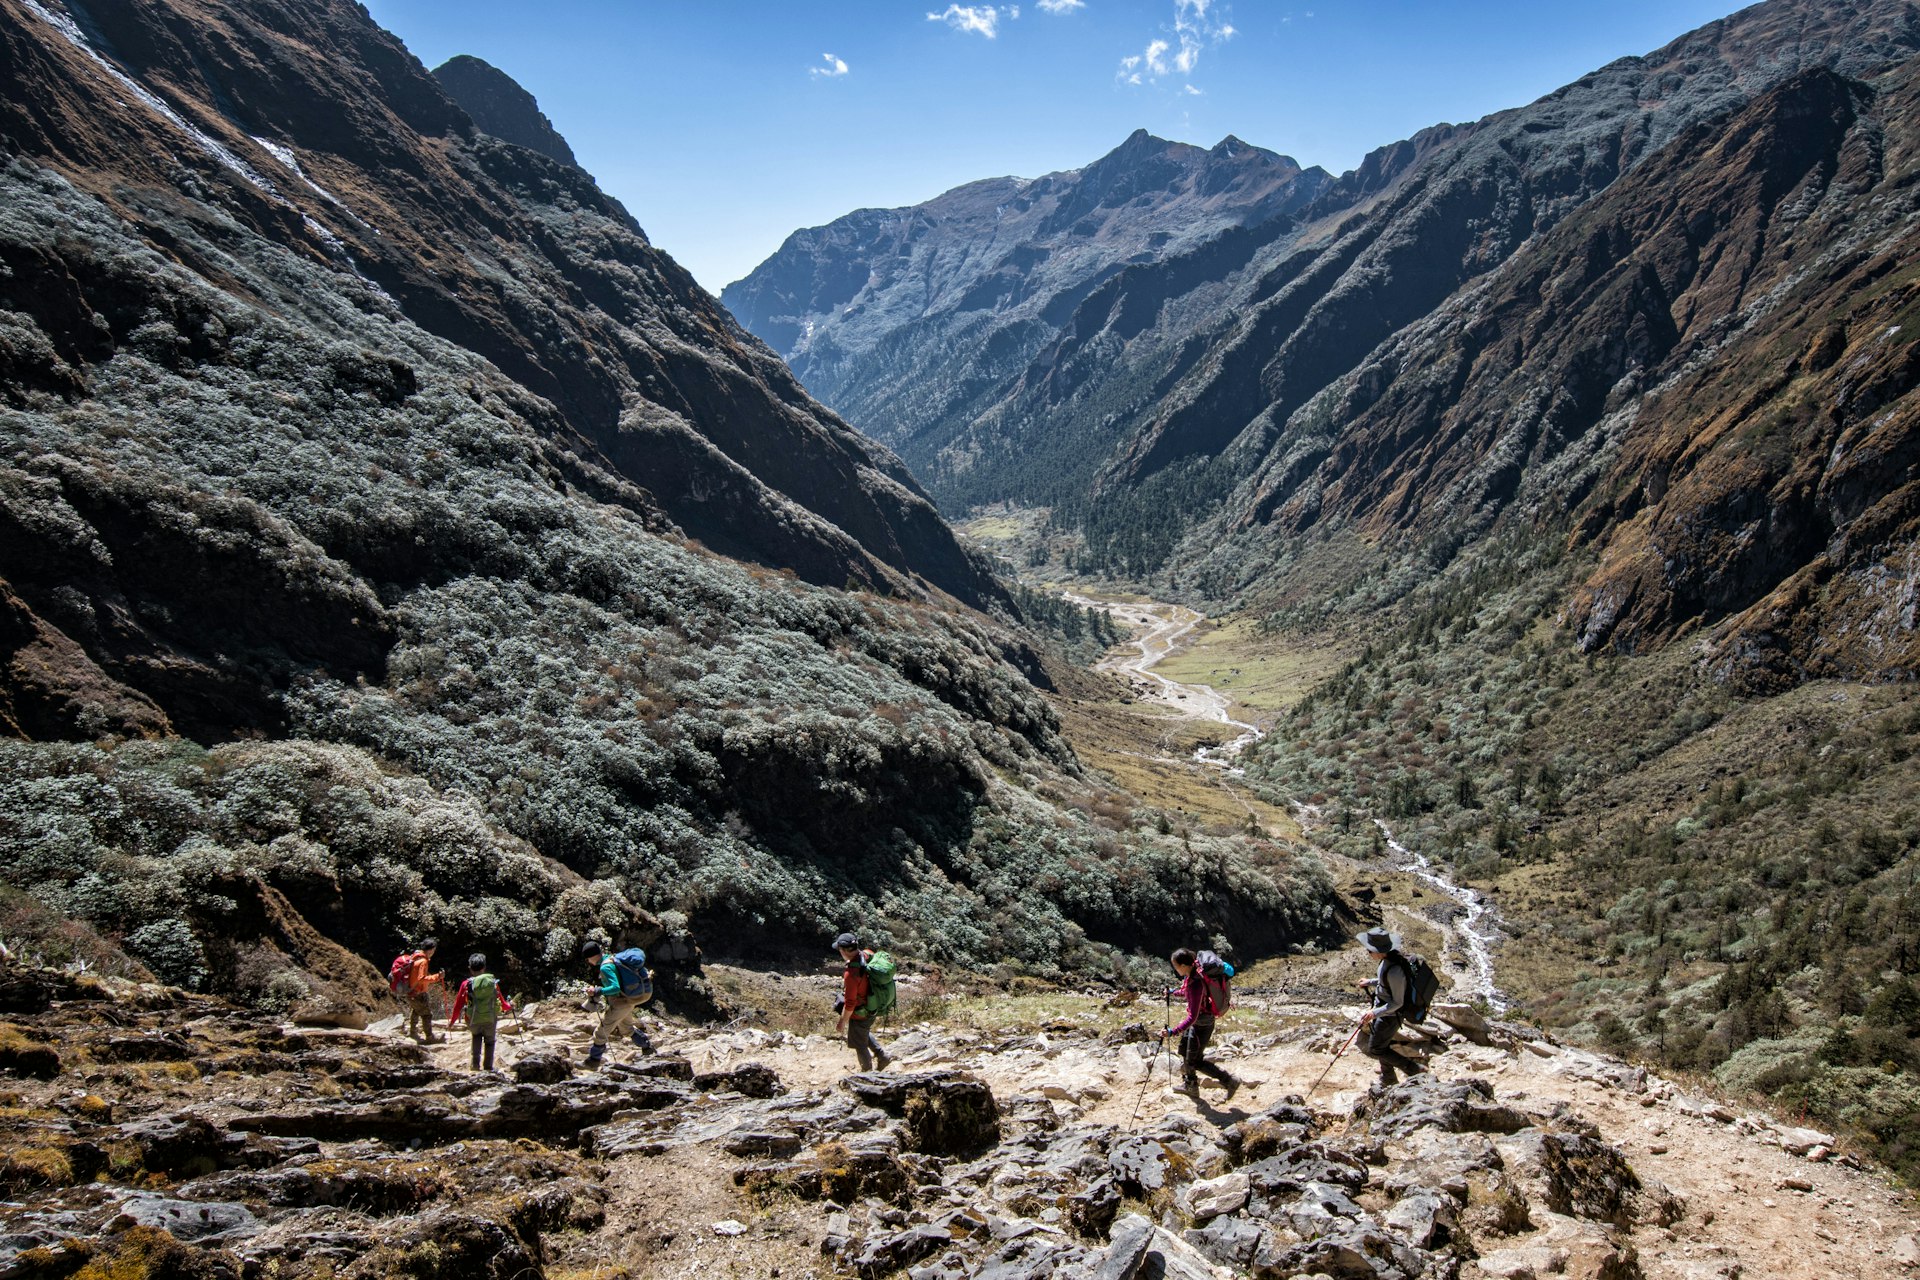 A group of hikers carry their gear on a trail through a mountainous region